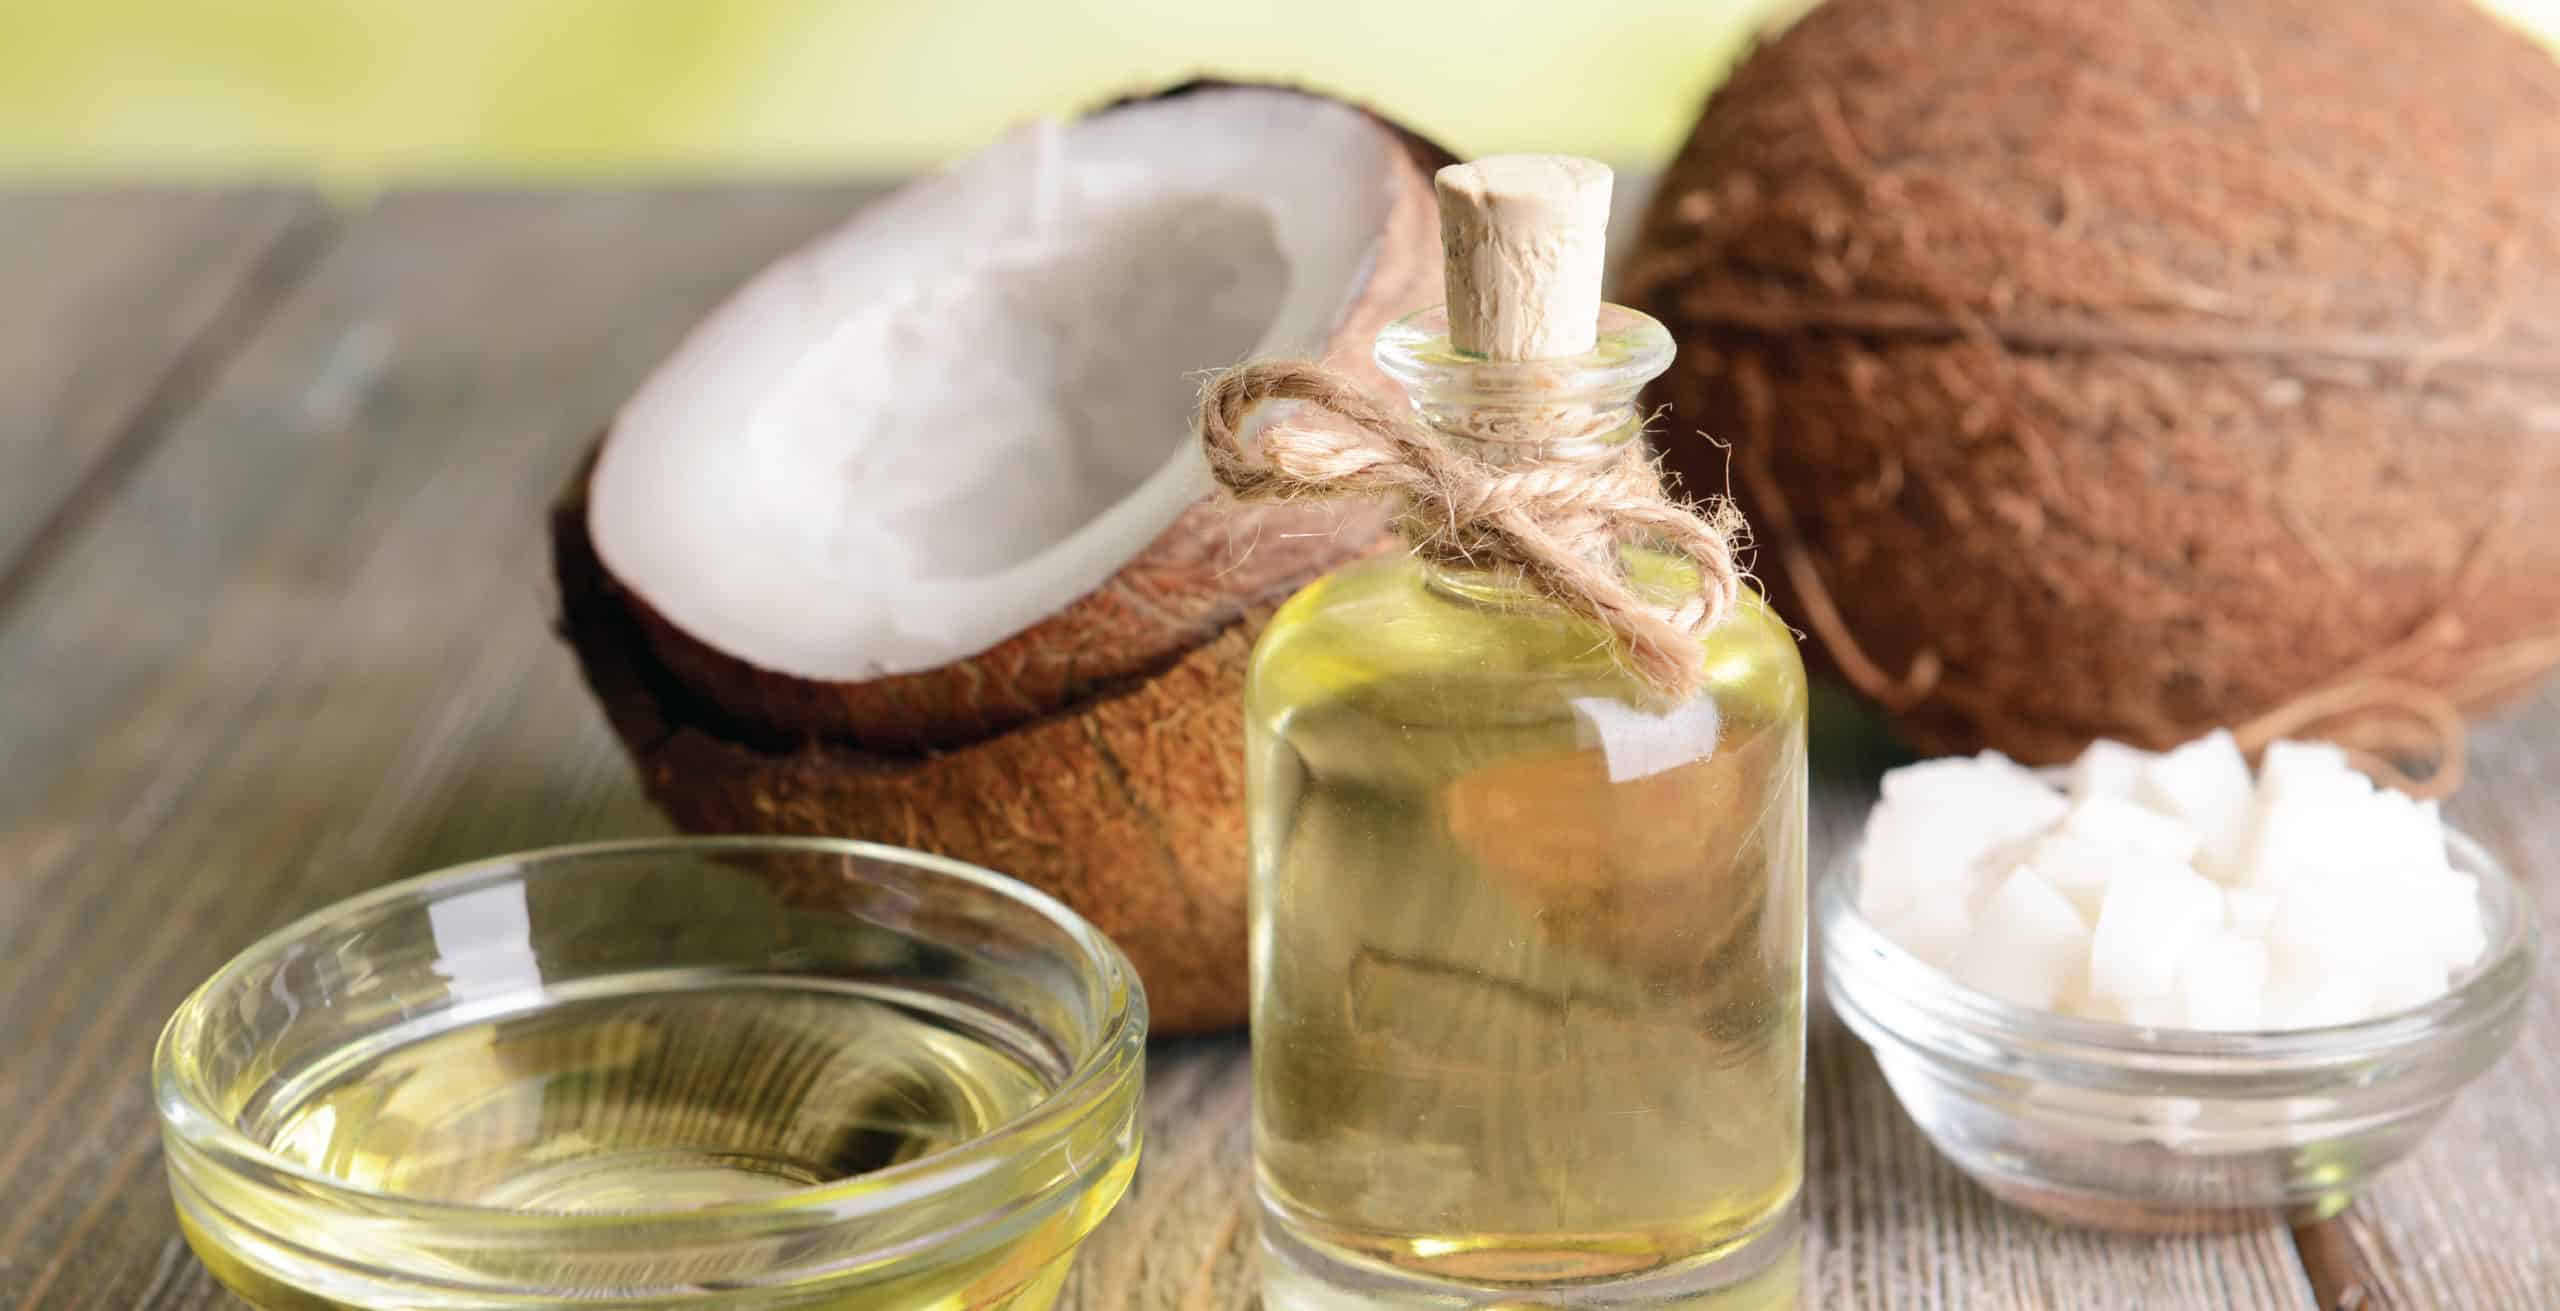 Coconut oil products: How to use coconut oil for hair, skin, face